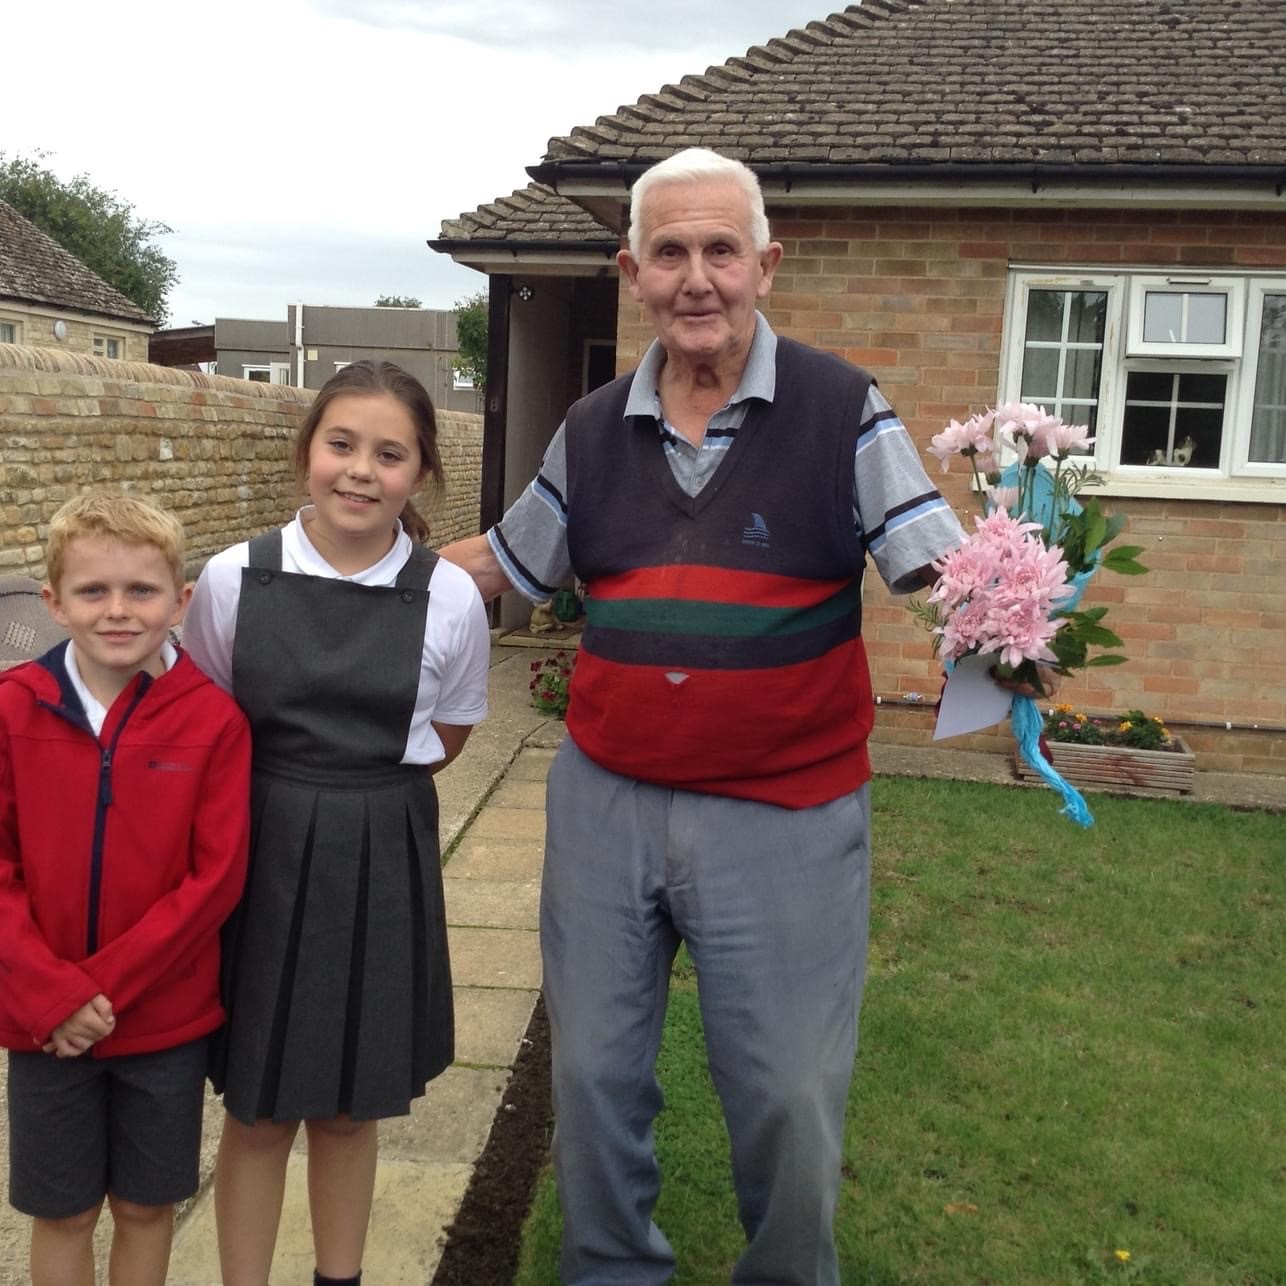 Mr Edwards receives his card and flowers